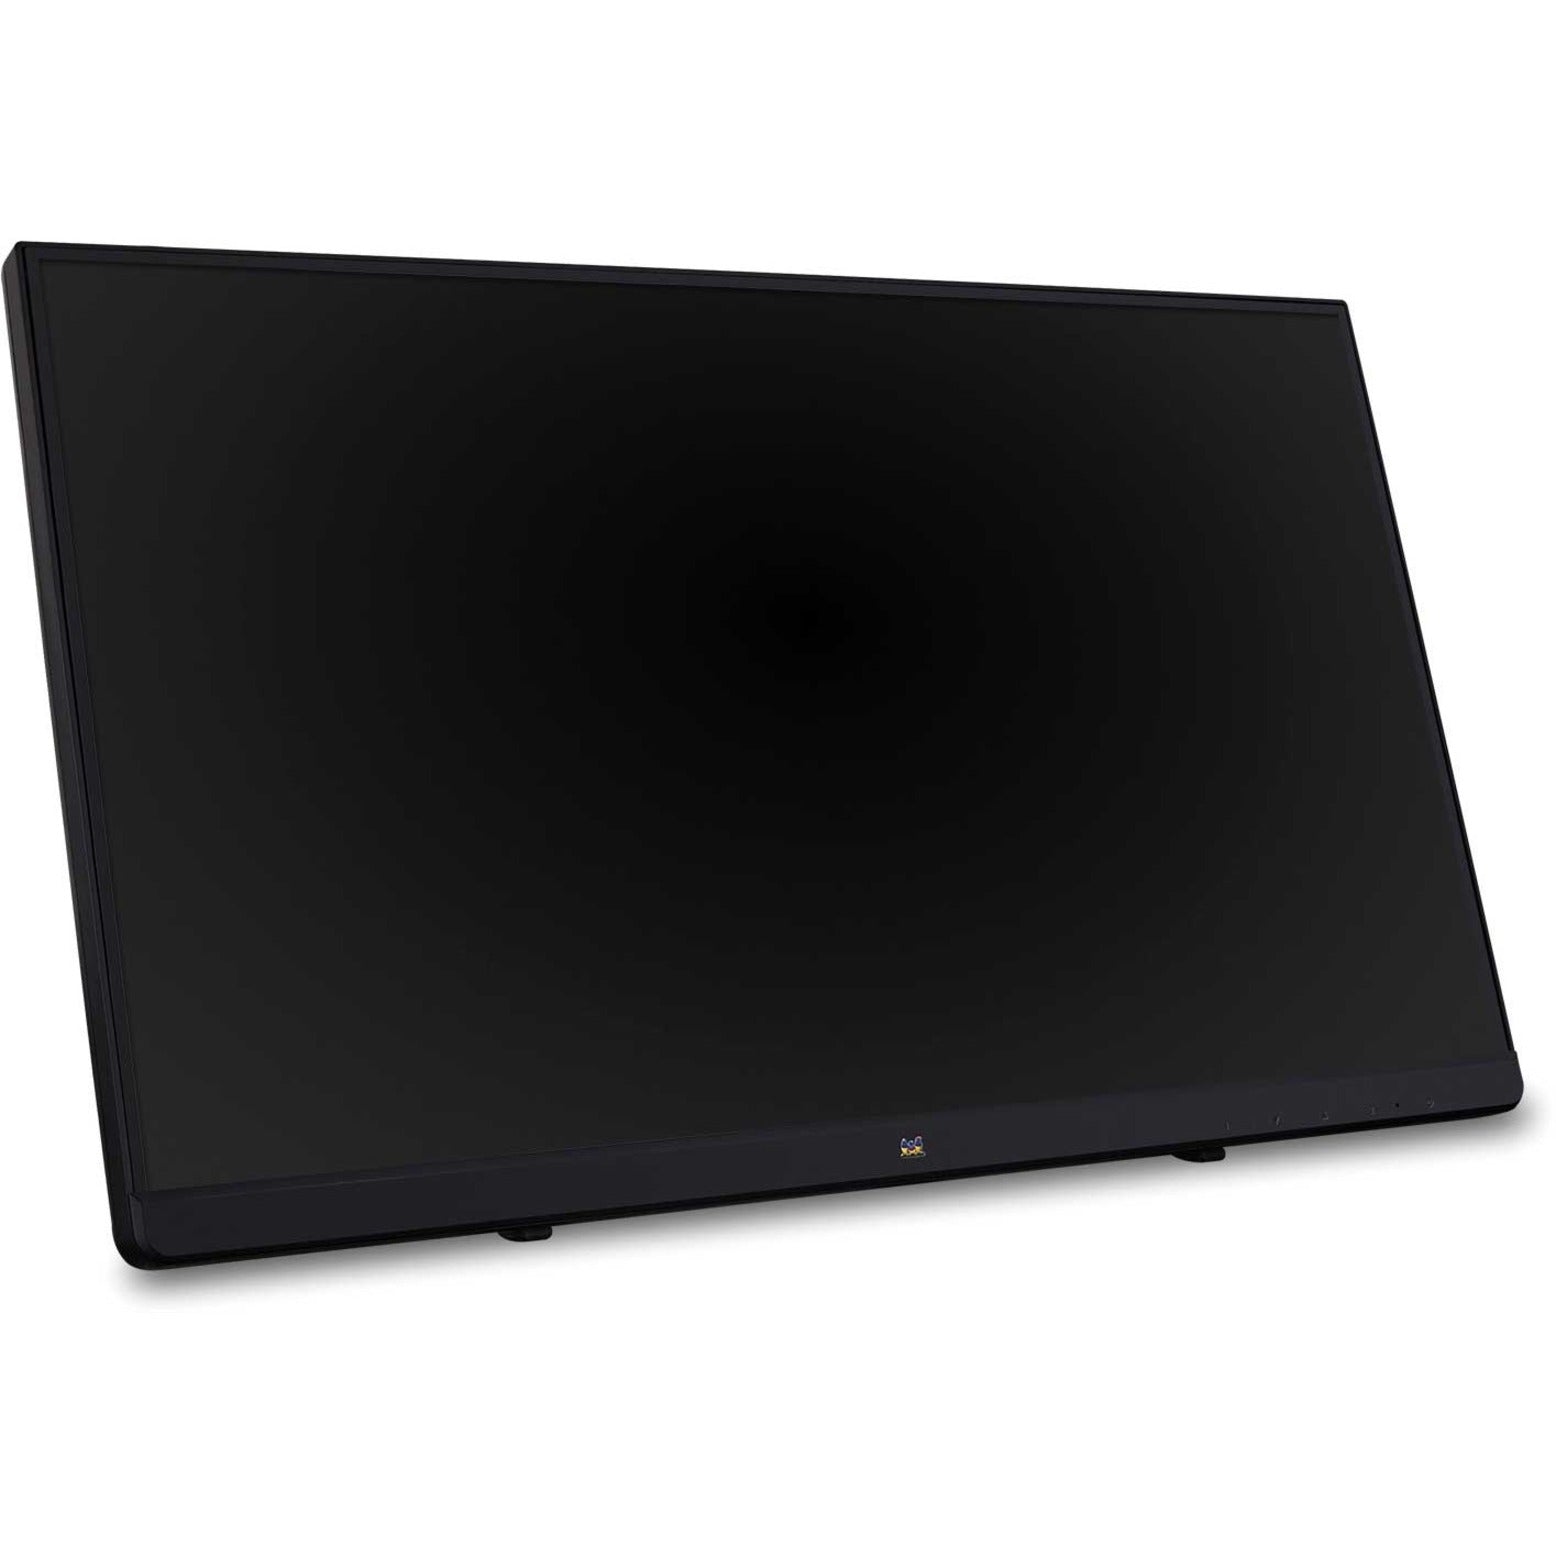 ViewSonic TD2230 Touchscreen LCD Monitor, 22IN 10PT TOUCH 1920X1080, SuperClear IPS, HDMI